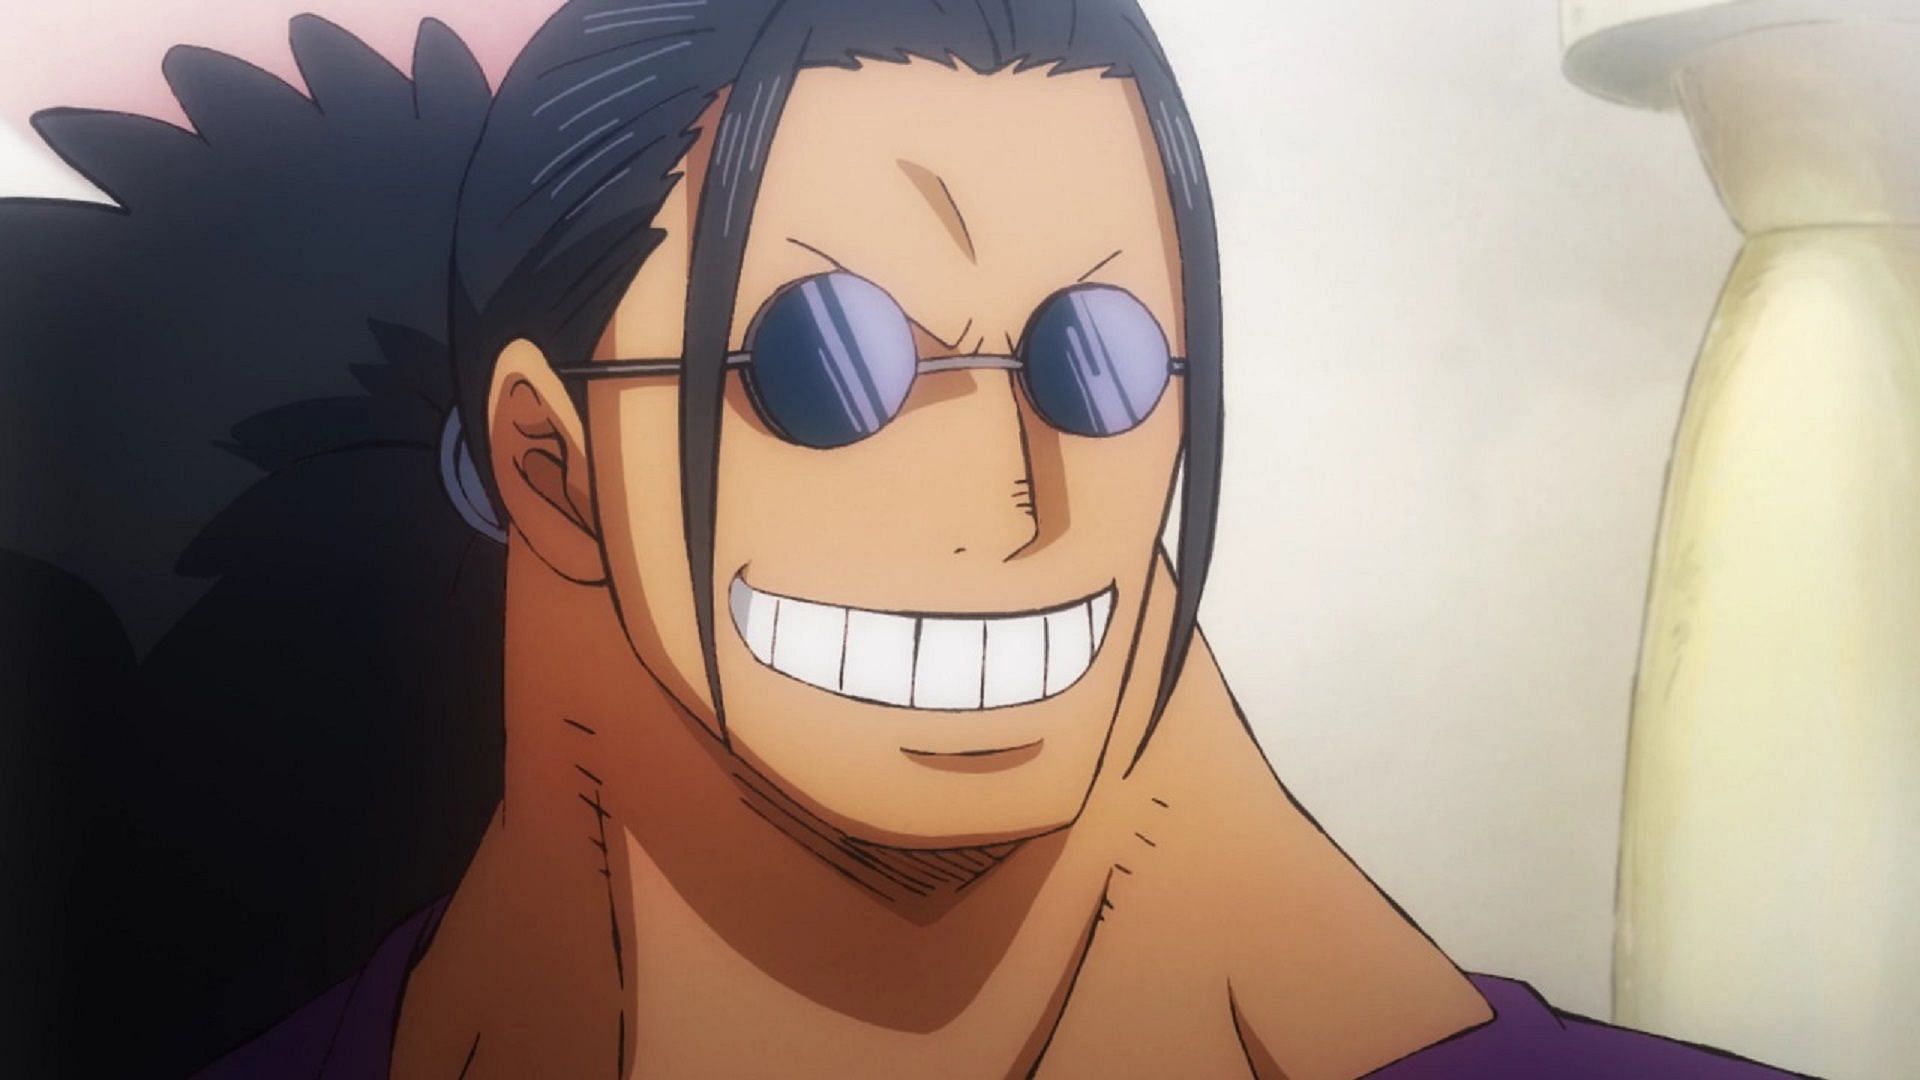 Scopper Gaban as seen in the One Piece anime (Image via Toei Animation, One Piece)